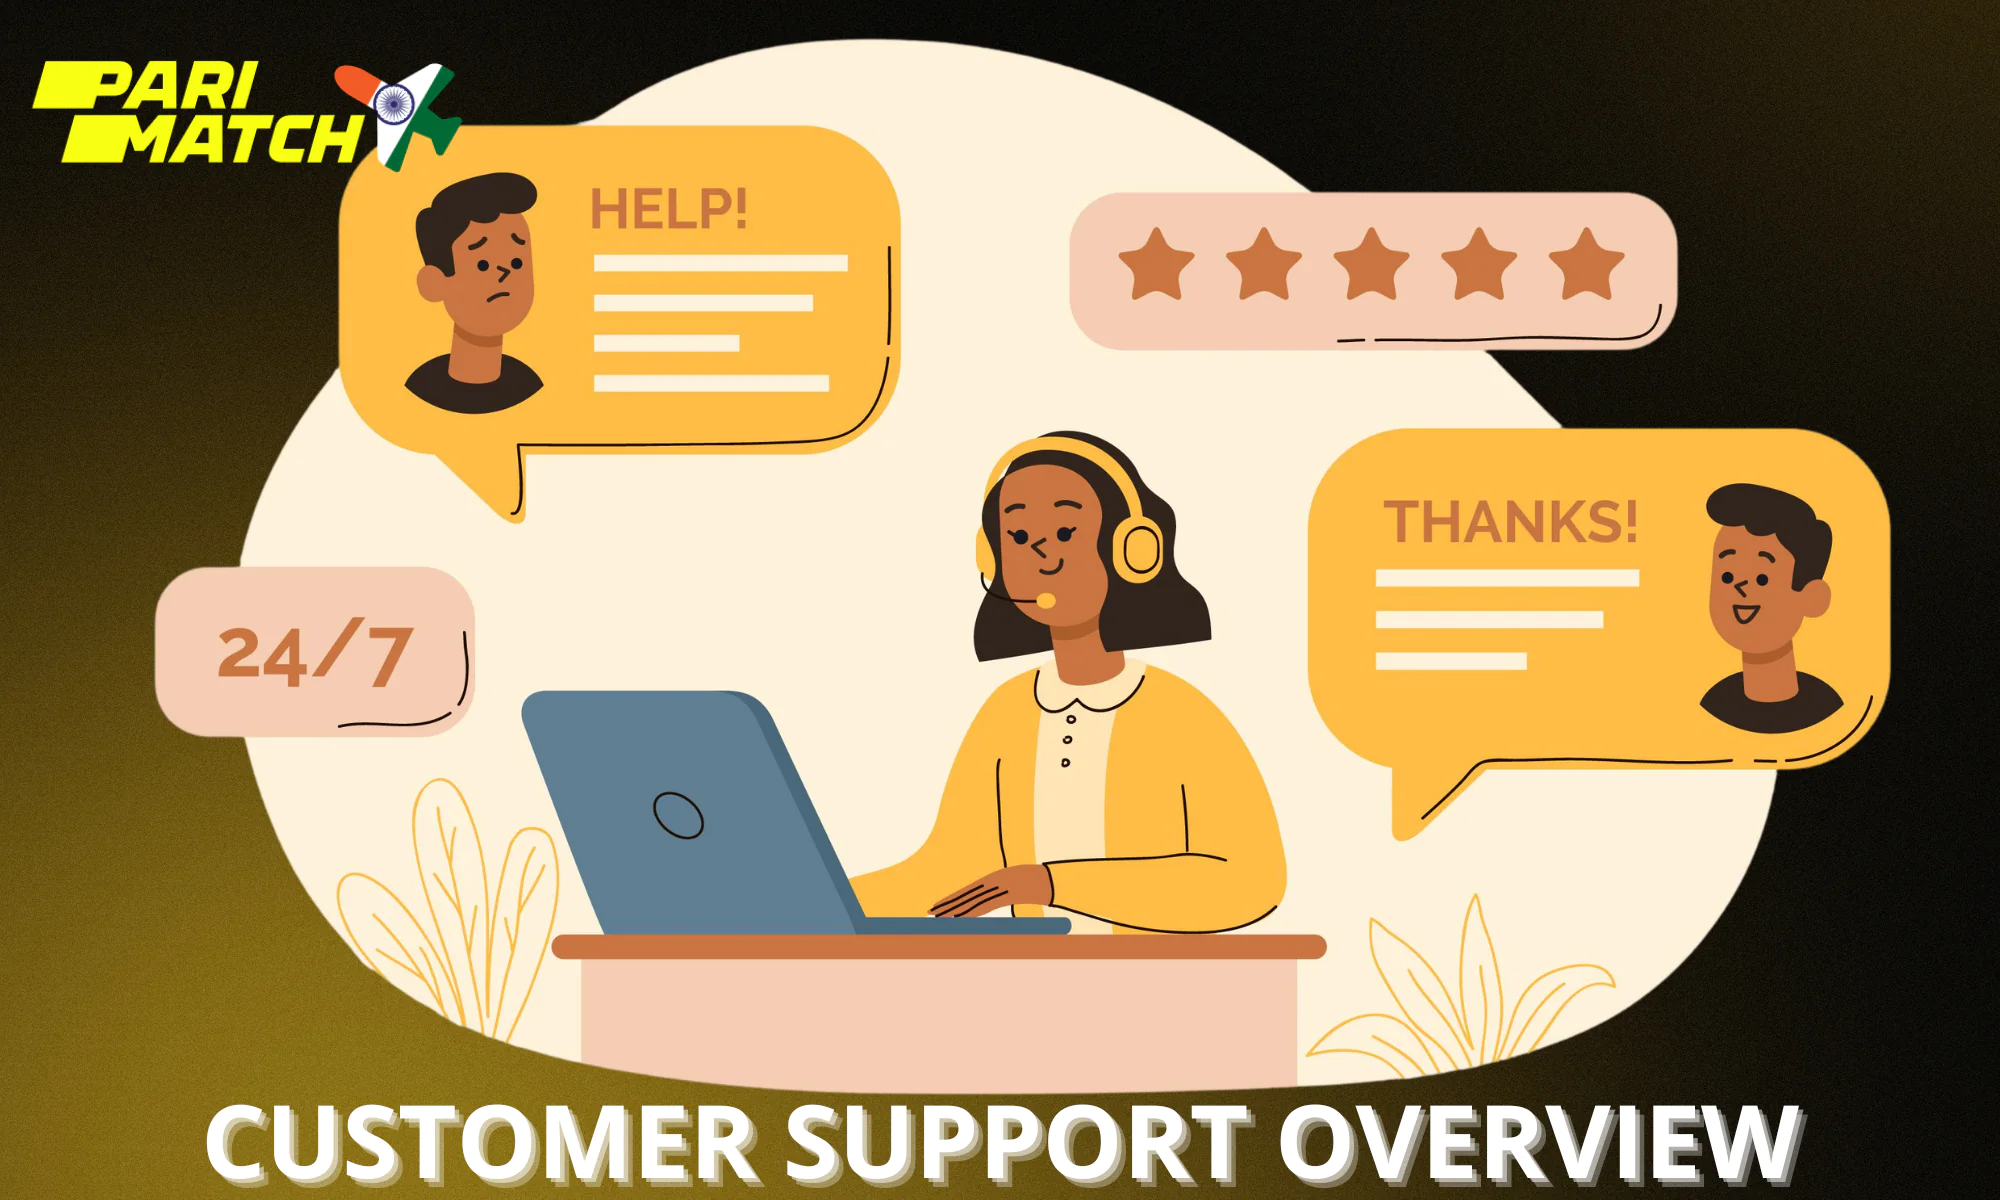 Parimatch Aviator has a very responsible and professional customer support team